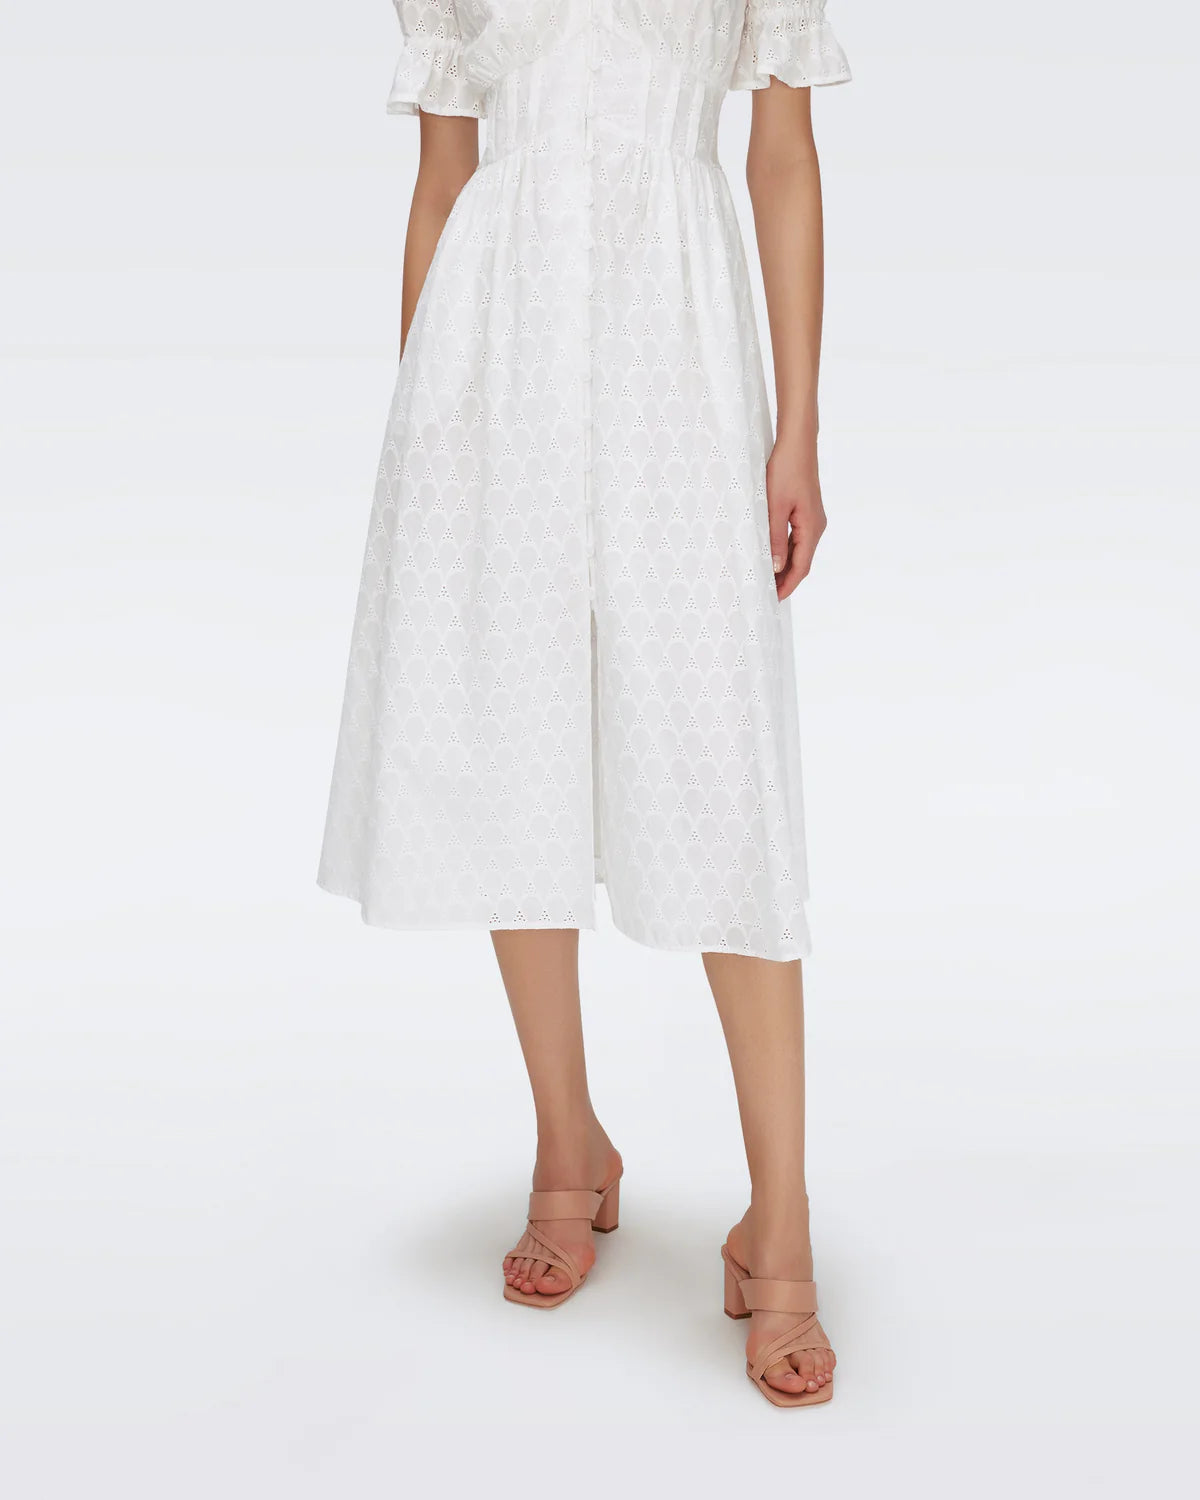 Erica Eyelet A-line Dress In White